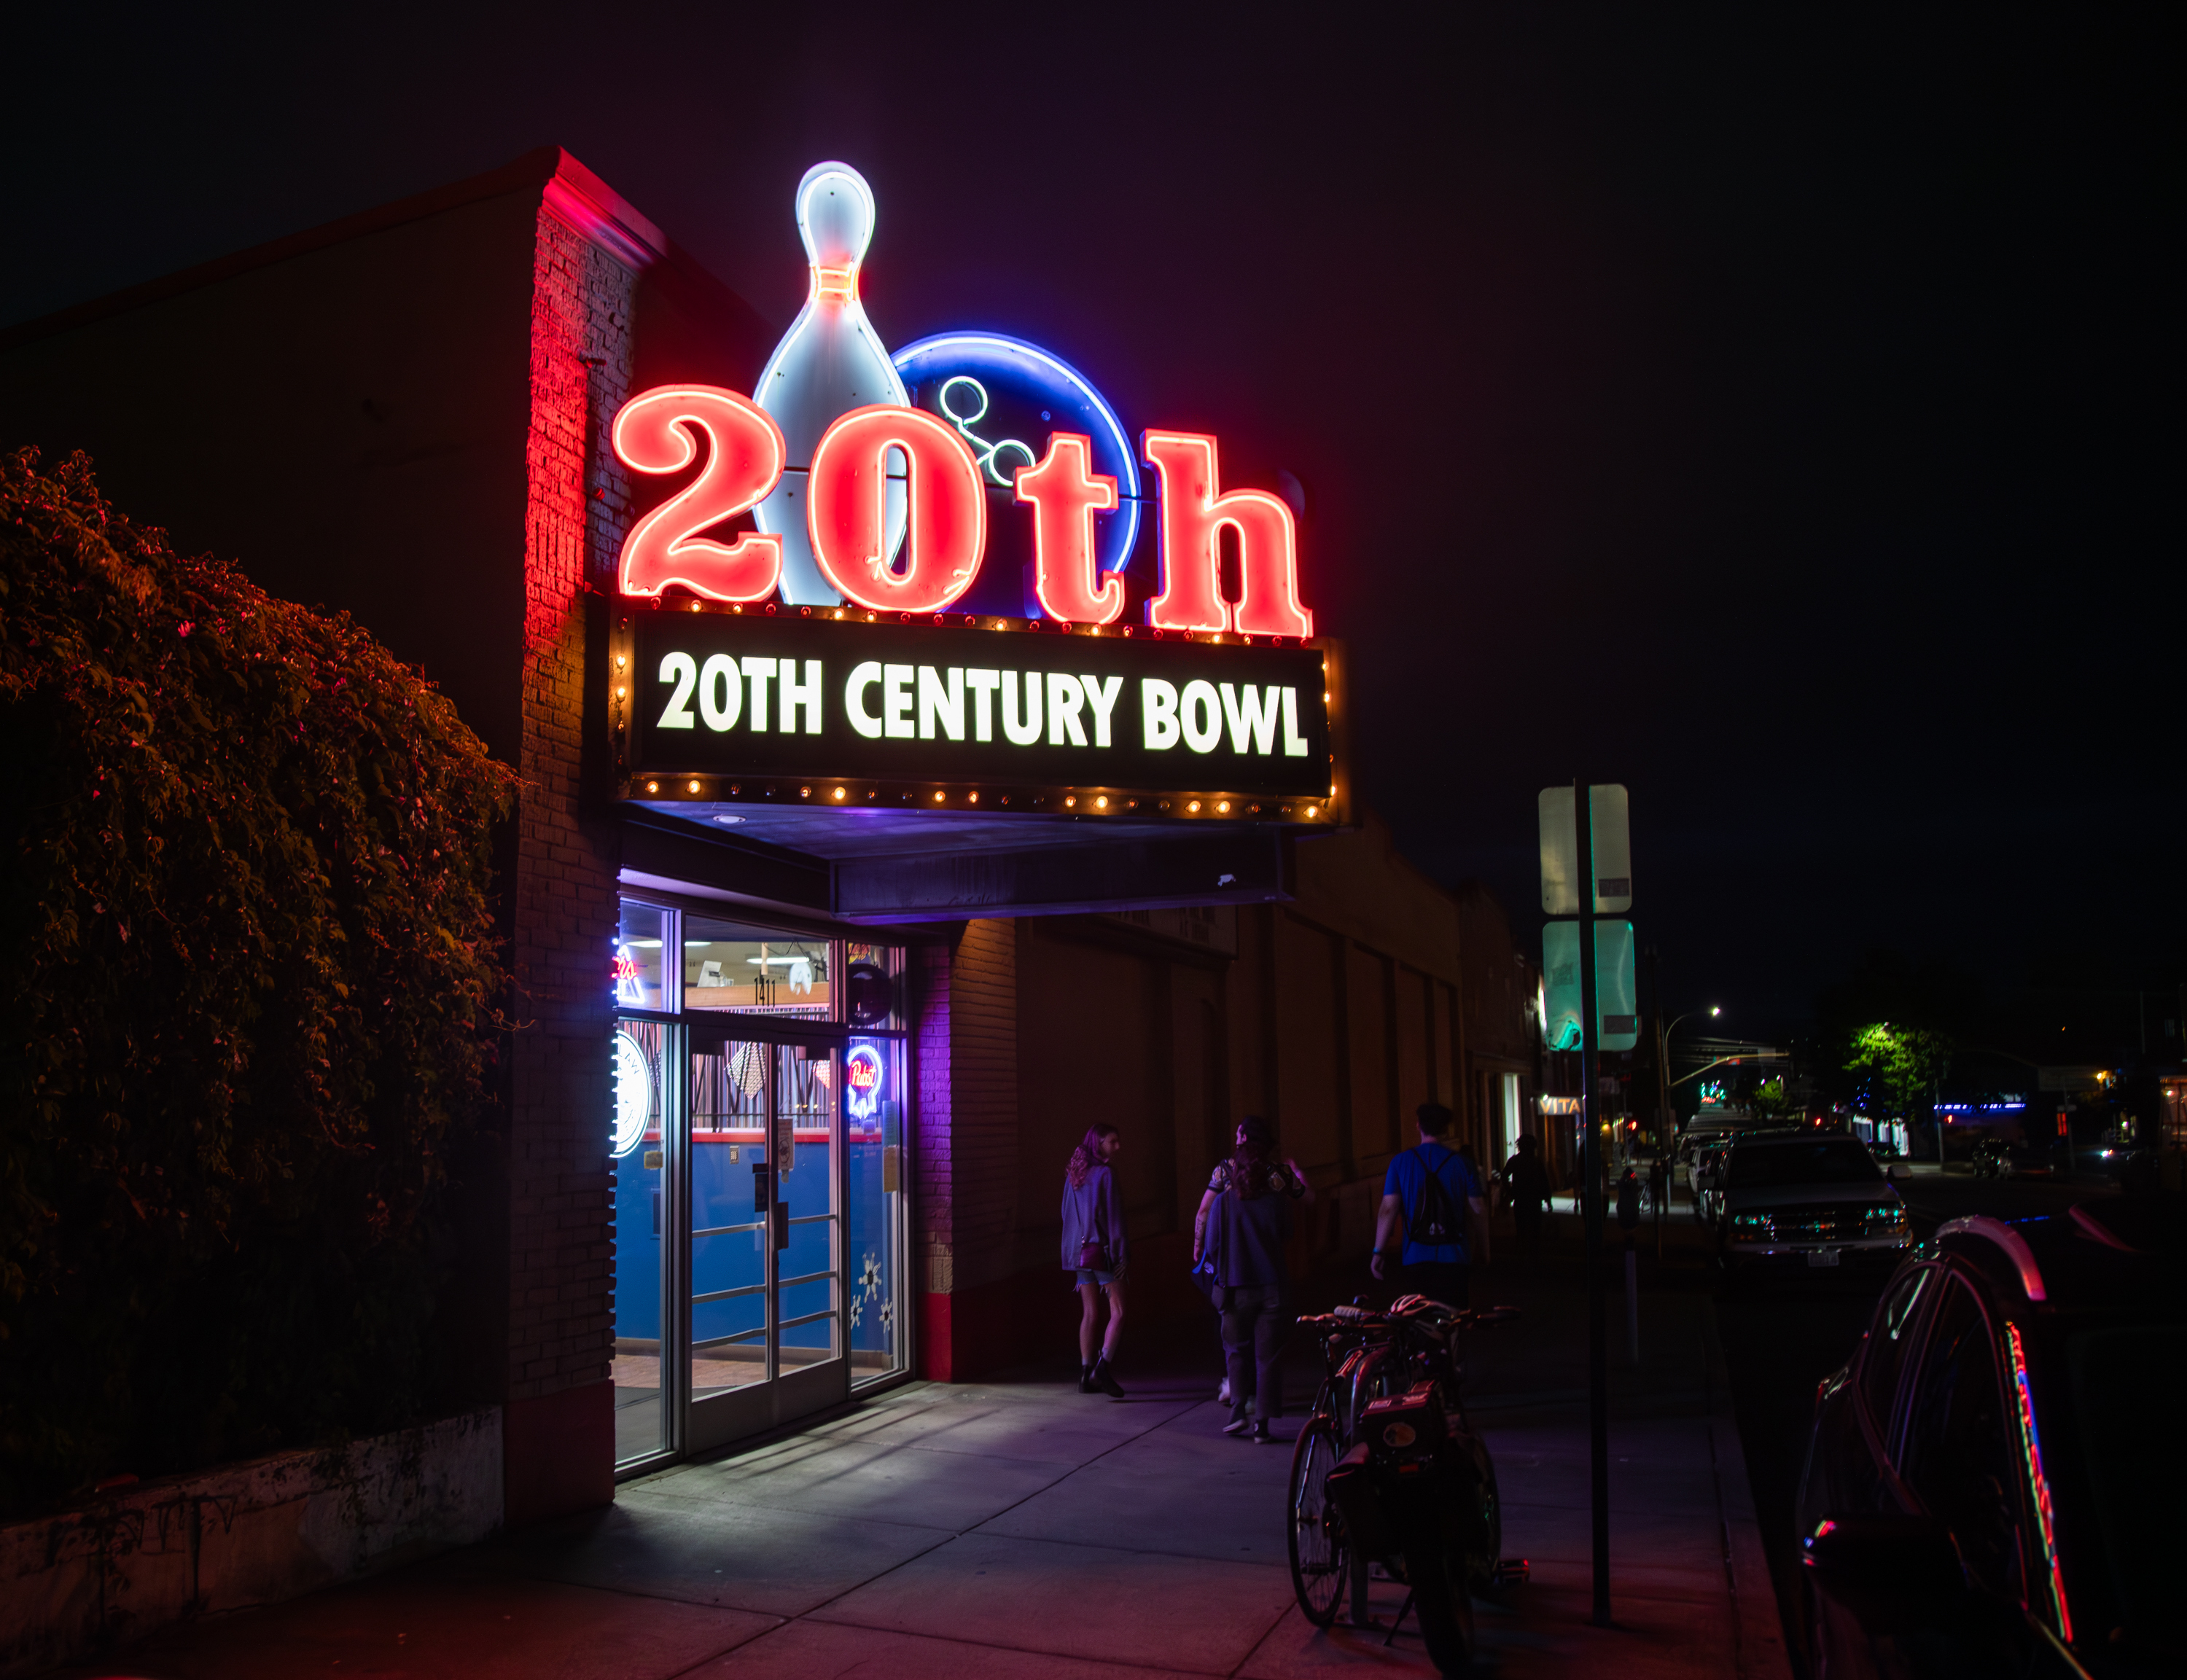 20th Century Bowl on State Street in Bellingham is one of three bowling centers in Whatcom County. Originally located on Railroad Avenue in the '50s and co-owned by Dick Brannian, the bowling alley is now owned and operated by his daughter, Beth Brannian, who has worked there since she was 16. “The sense of community that we have here is really special,